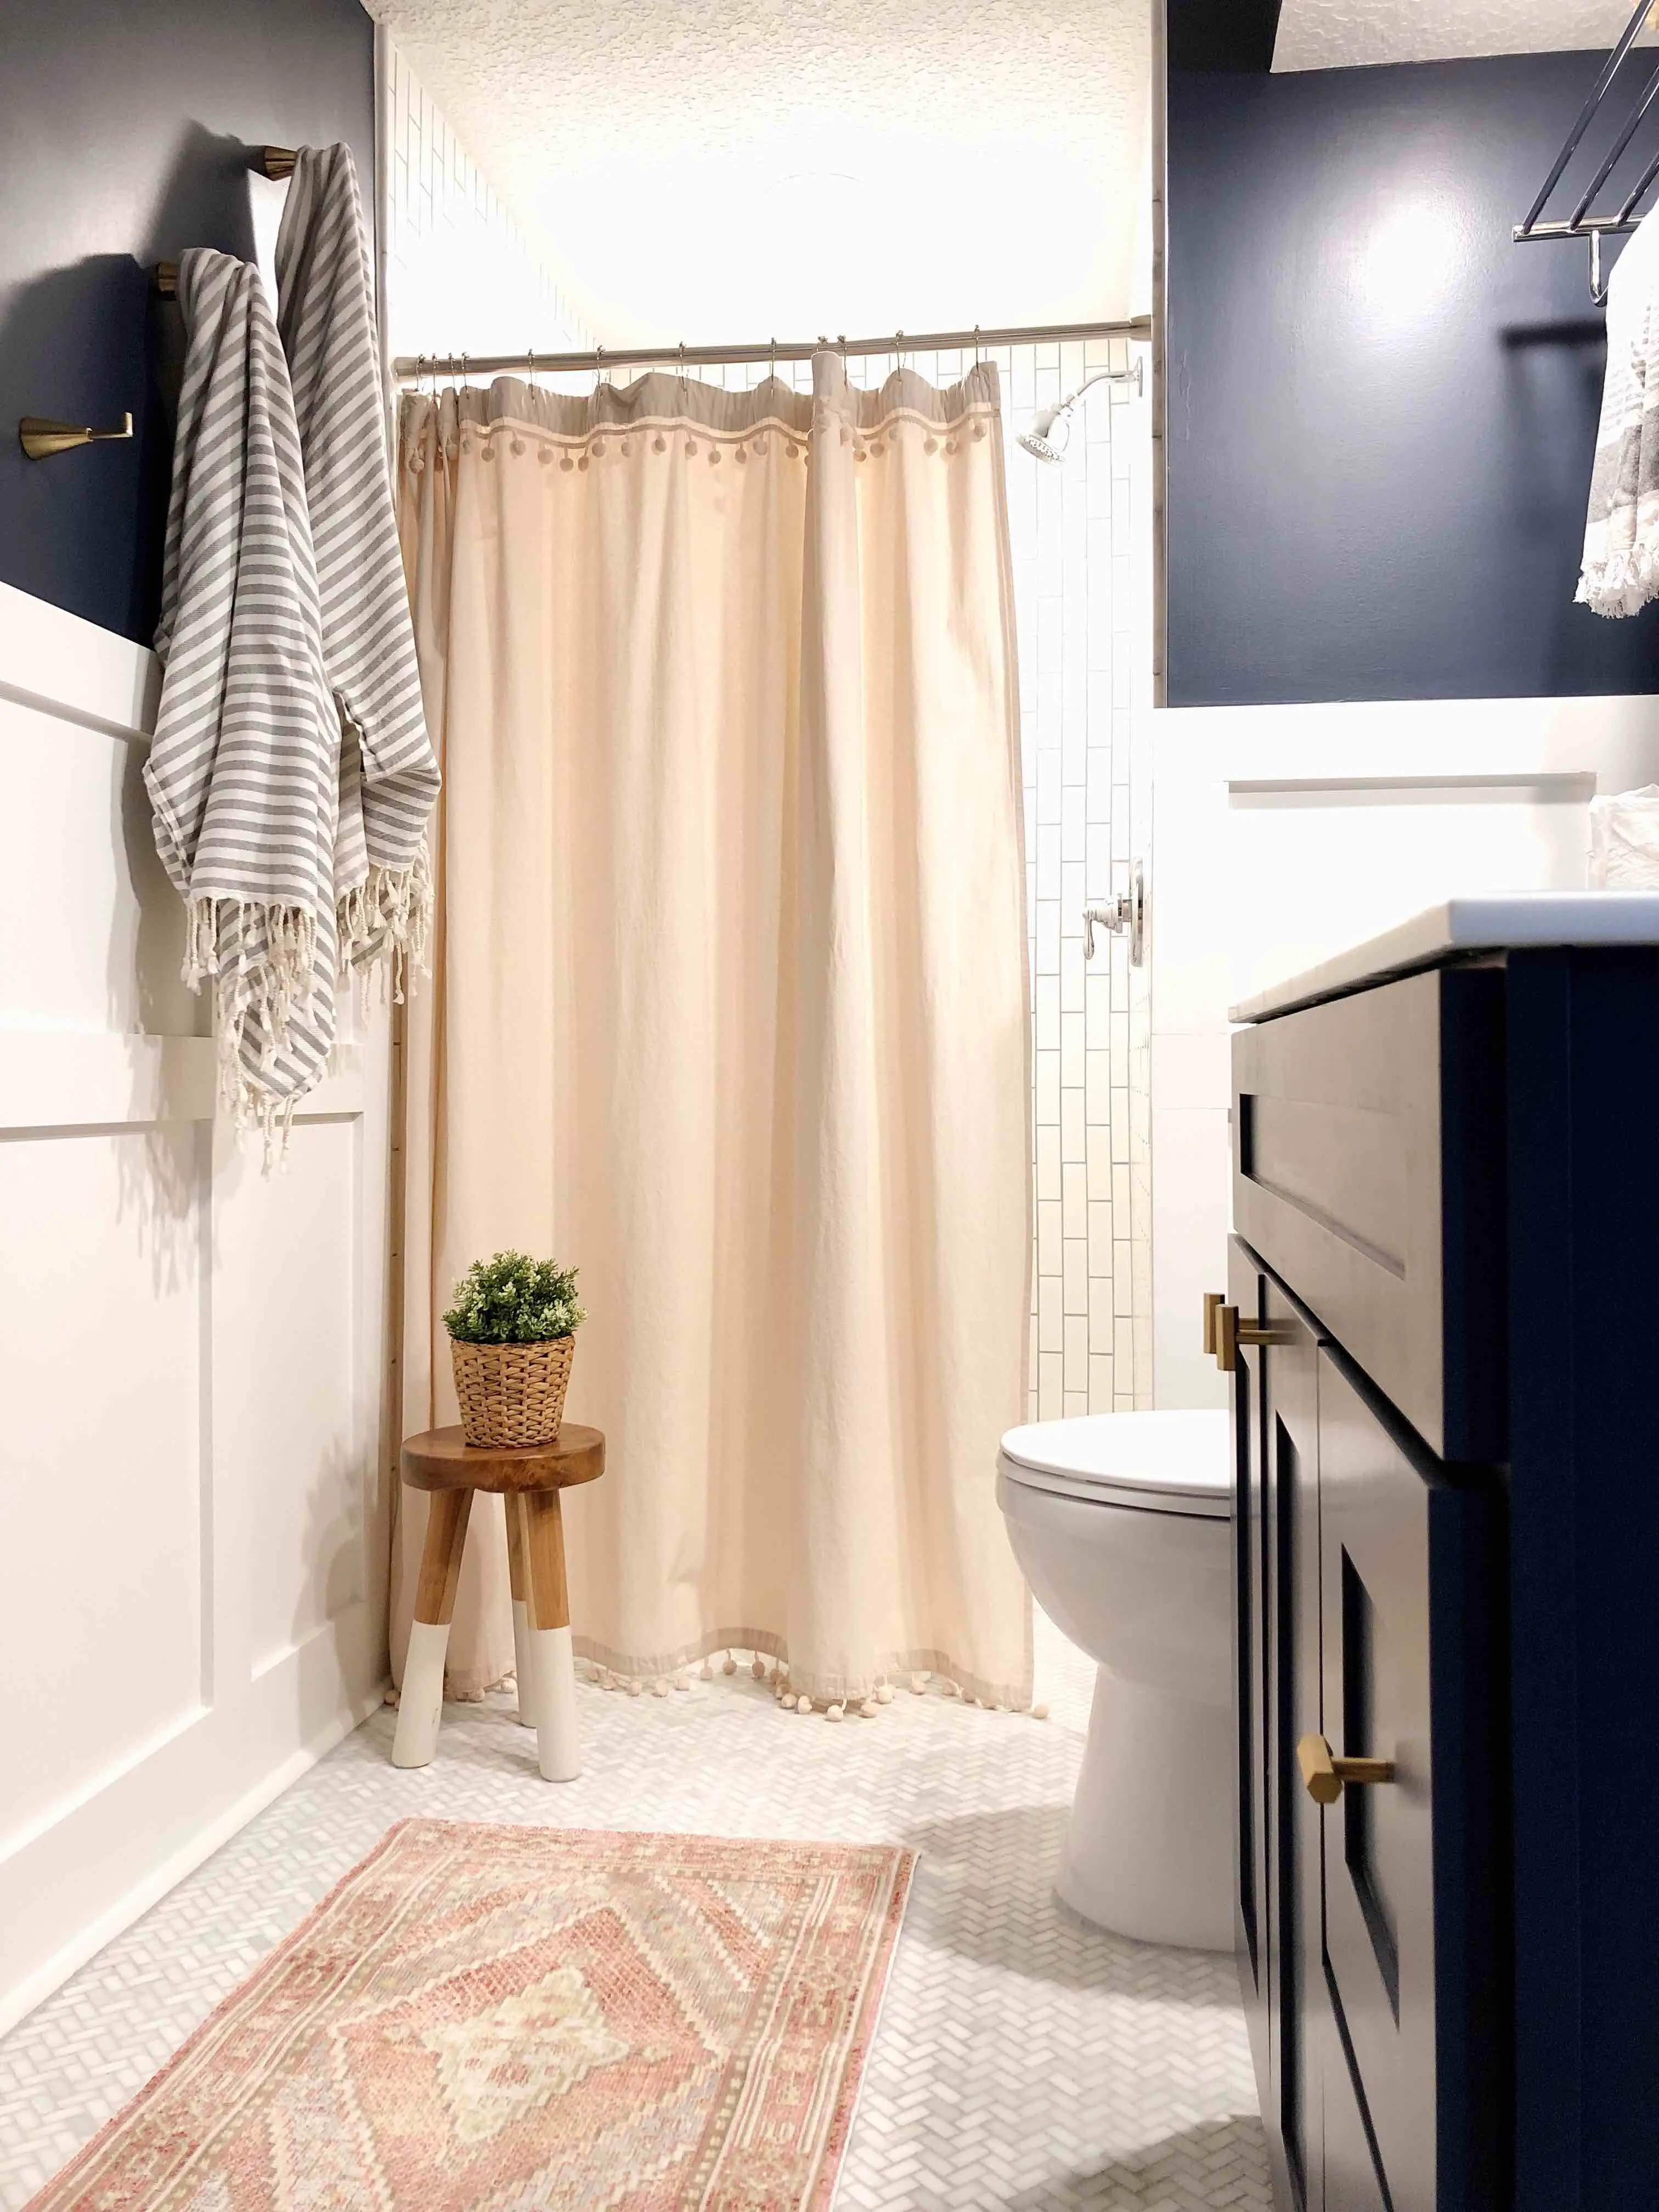 Four Simple Ways to Add Style to Any Bathroom